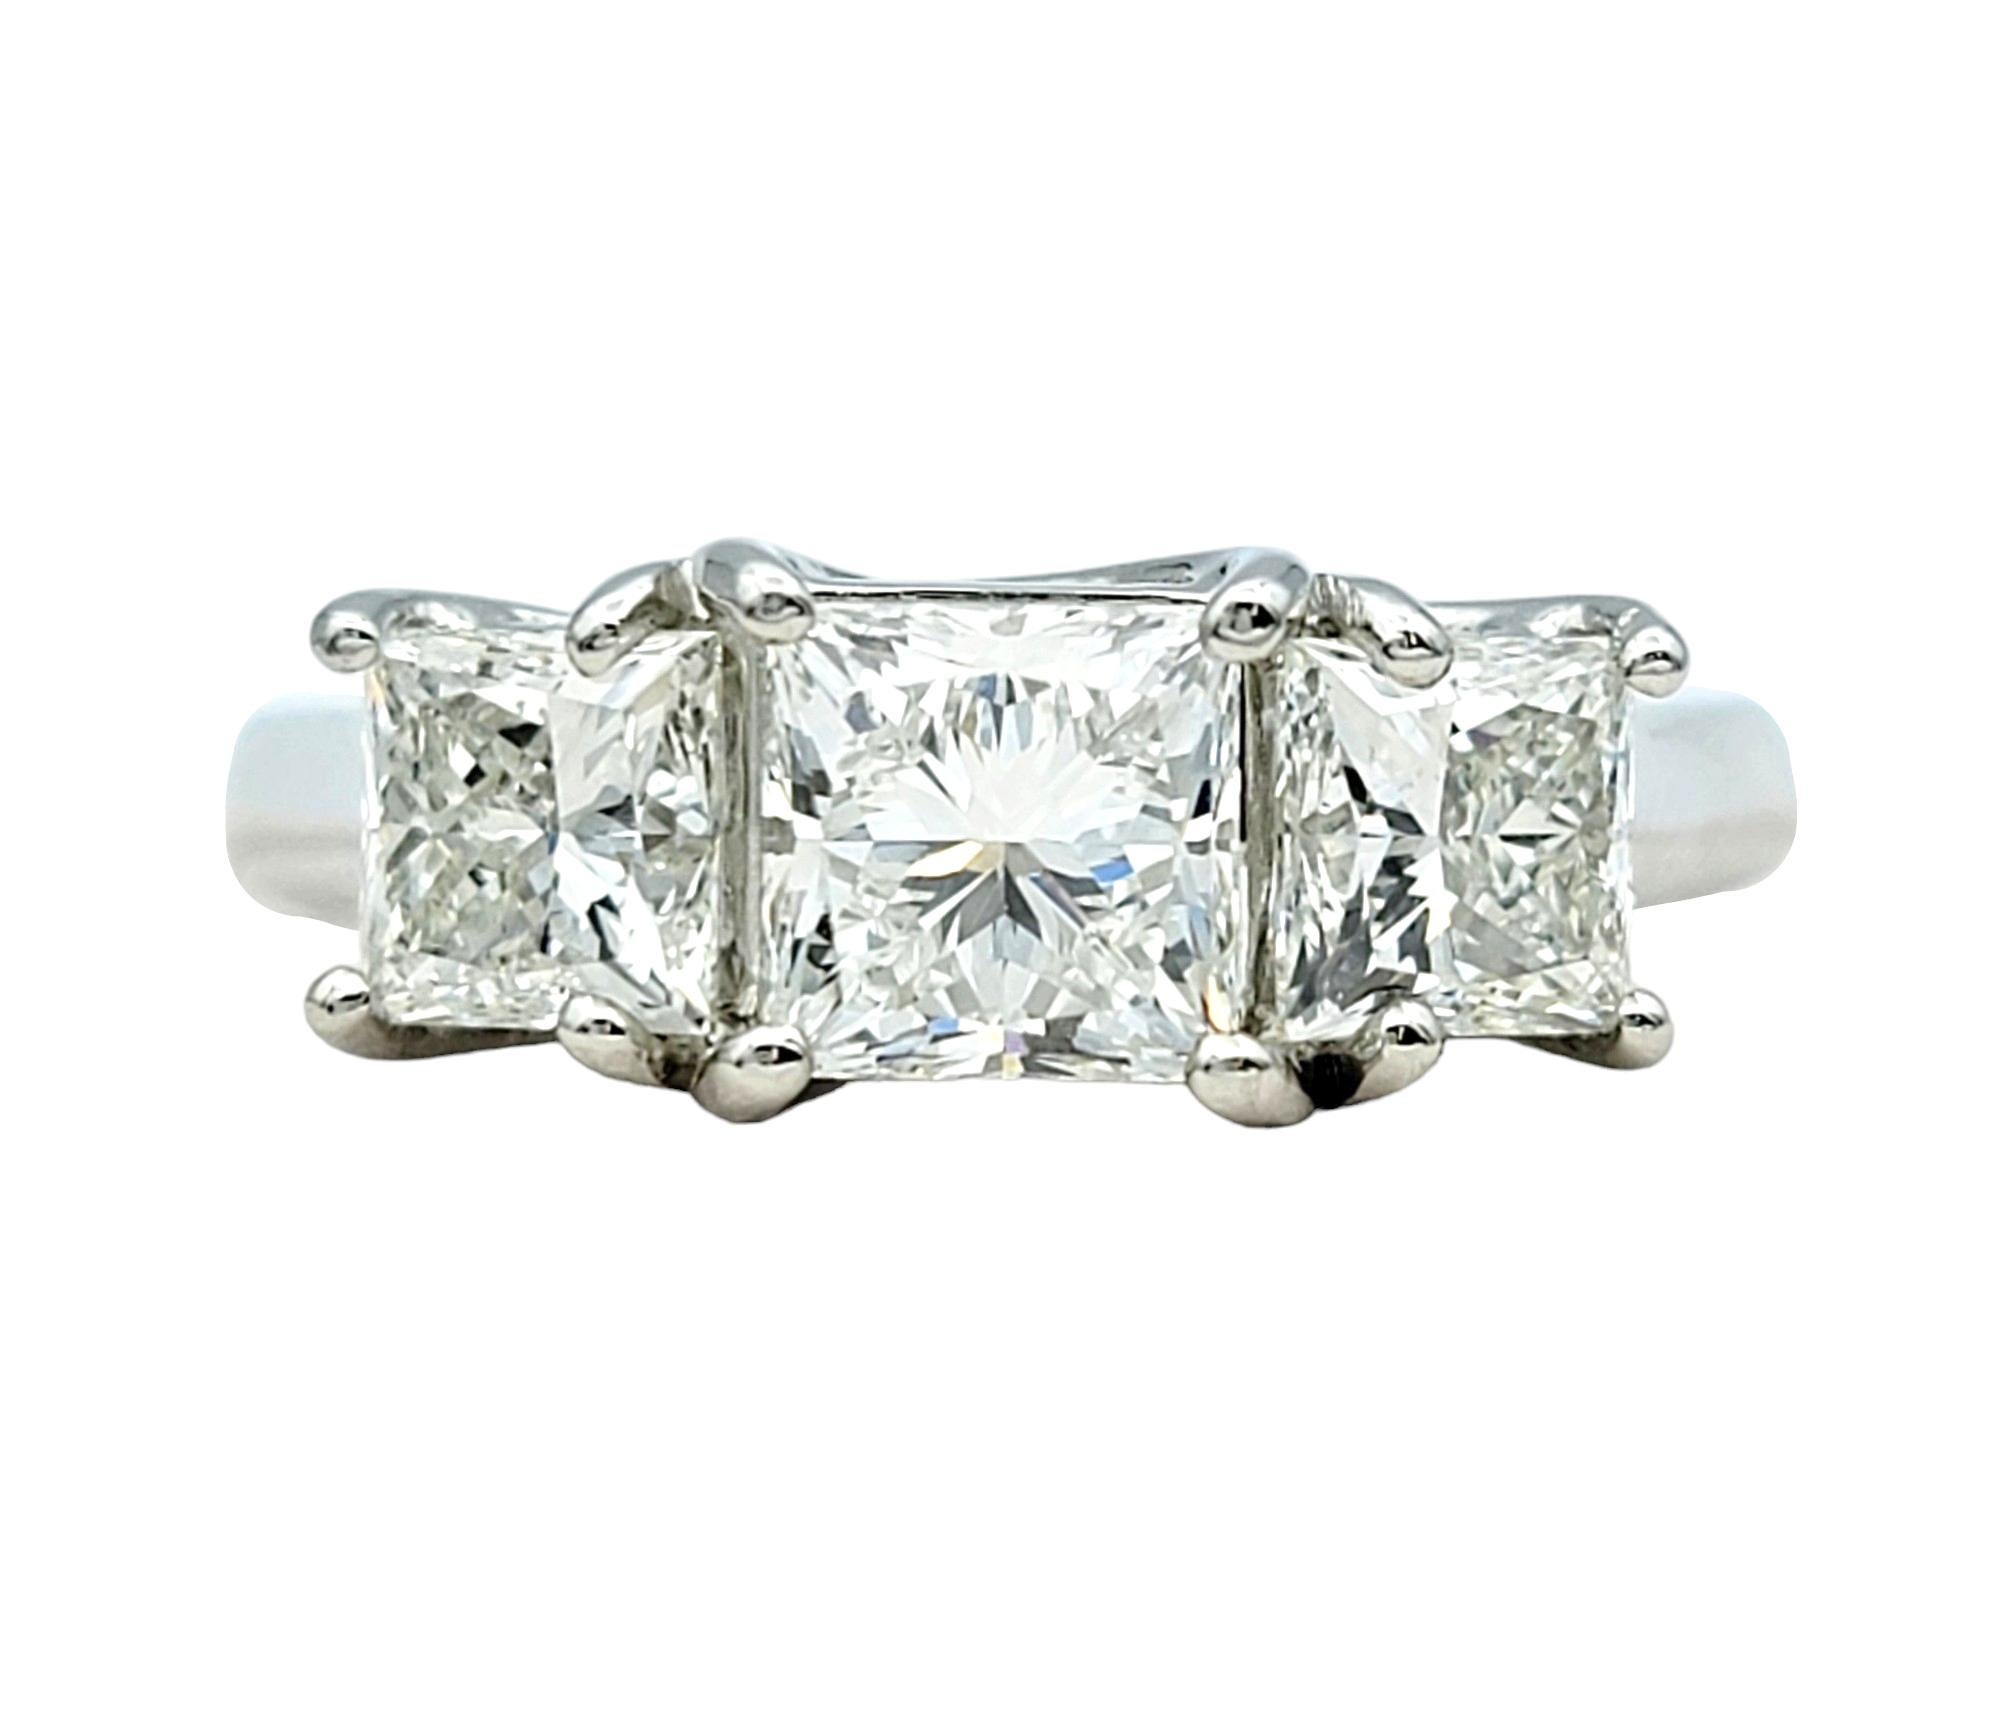 Contemporary 1.83 Total Carat Princess Cut Three Stone Diamond Ring Set in Platinum, Size 5.5 For Sale